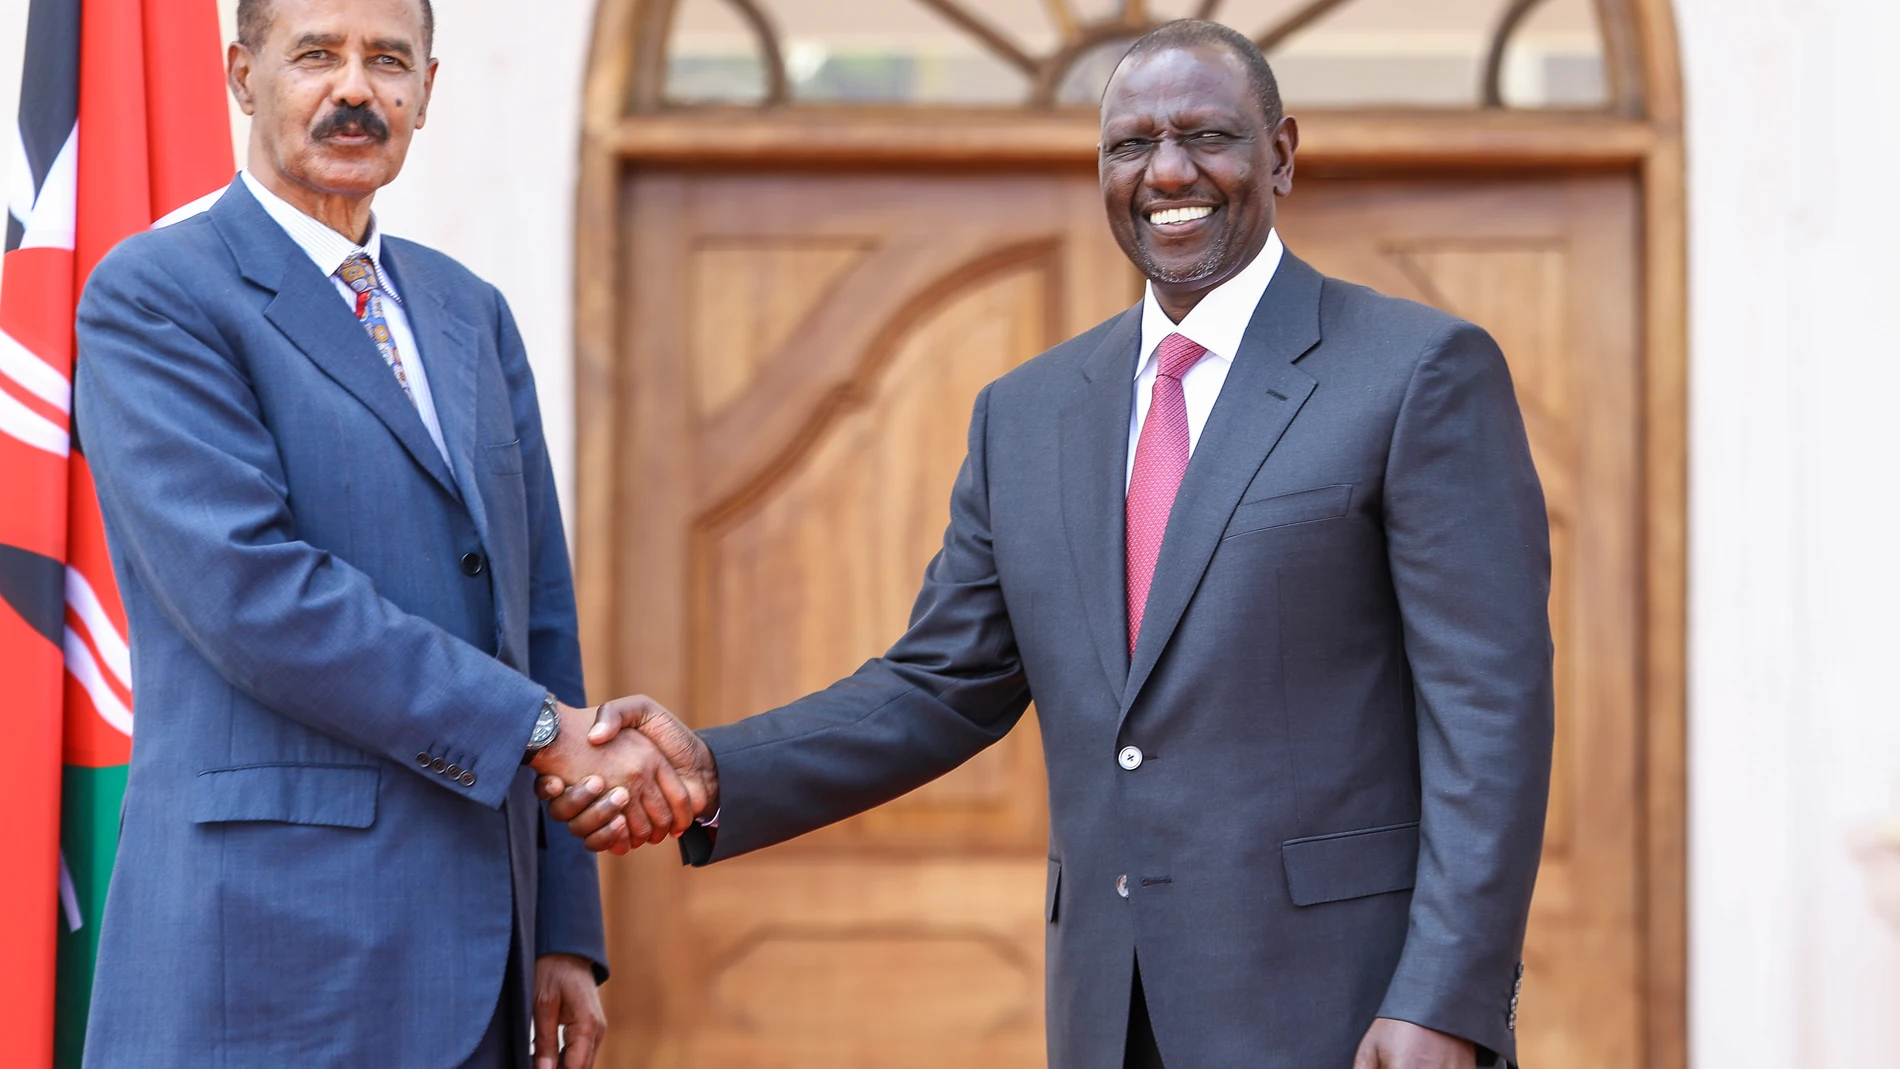 Nairobi (Kenya), 09/02/2023.- Eritrean President Isaias Afwerki (L) and Kenyan President William Ruto (R) pose for a photo after addressing a joint press conference after their meeting at State House in Nairobi, Kenya, 09 February 2023. Afwerki is on a two-day state visit to Kenya where he will attend official meetings to reinvigorate bilateral relations with Kenya and explore areas of mutual cooperation, including agriculture, trade and investment, air transport, energy and mining. Other key...